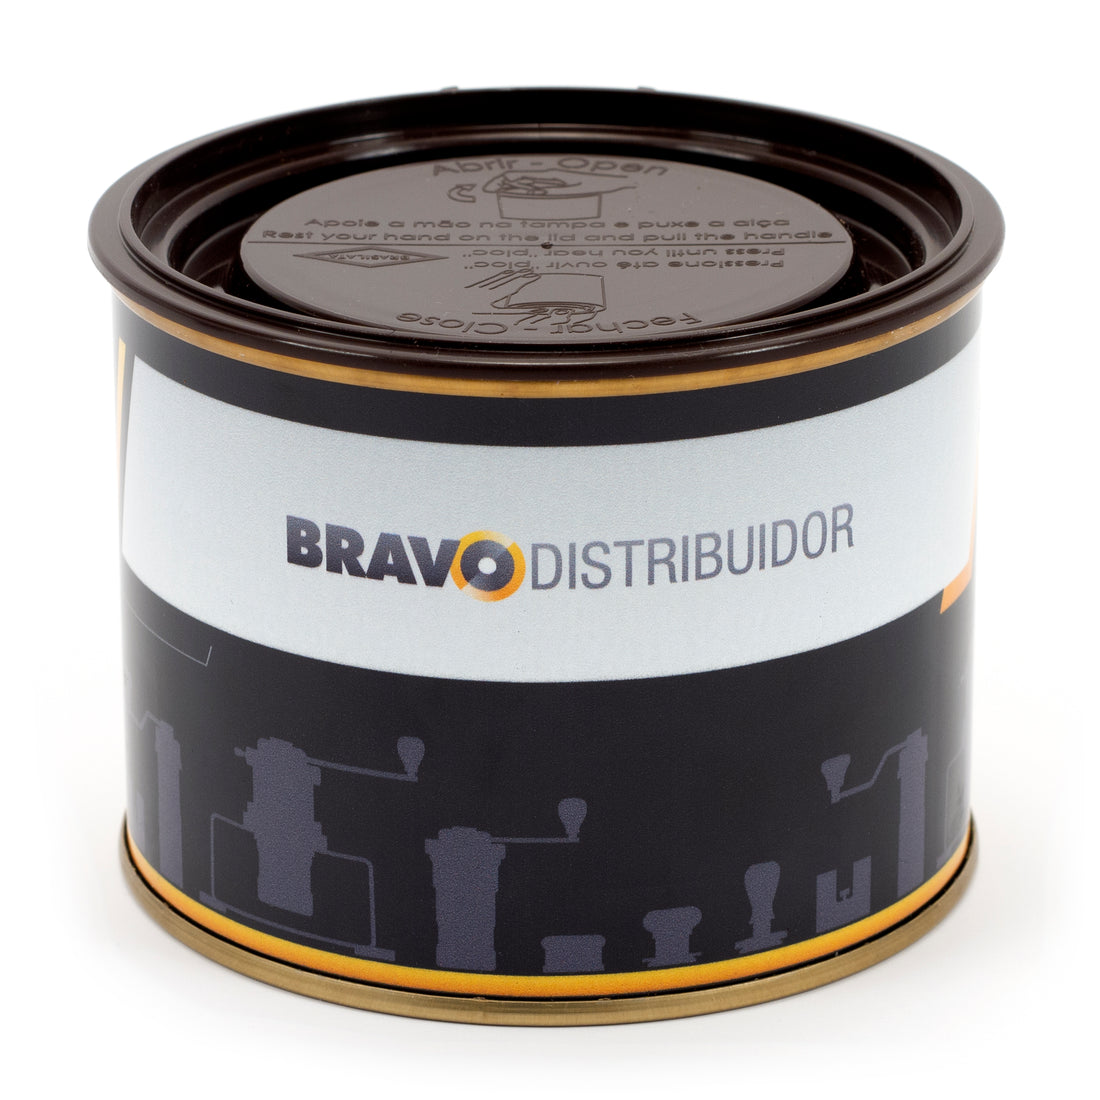 Bravo Distribuidor canister packaging.